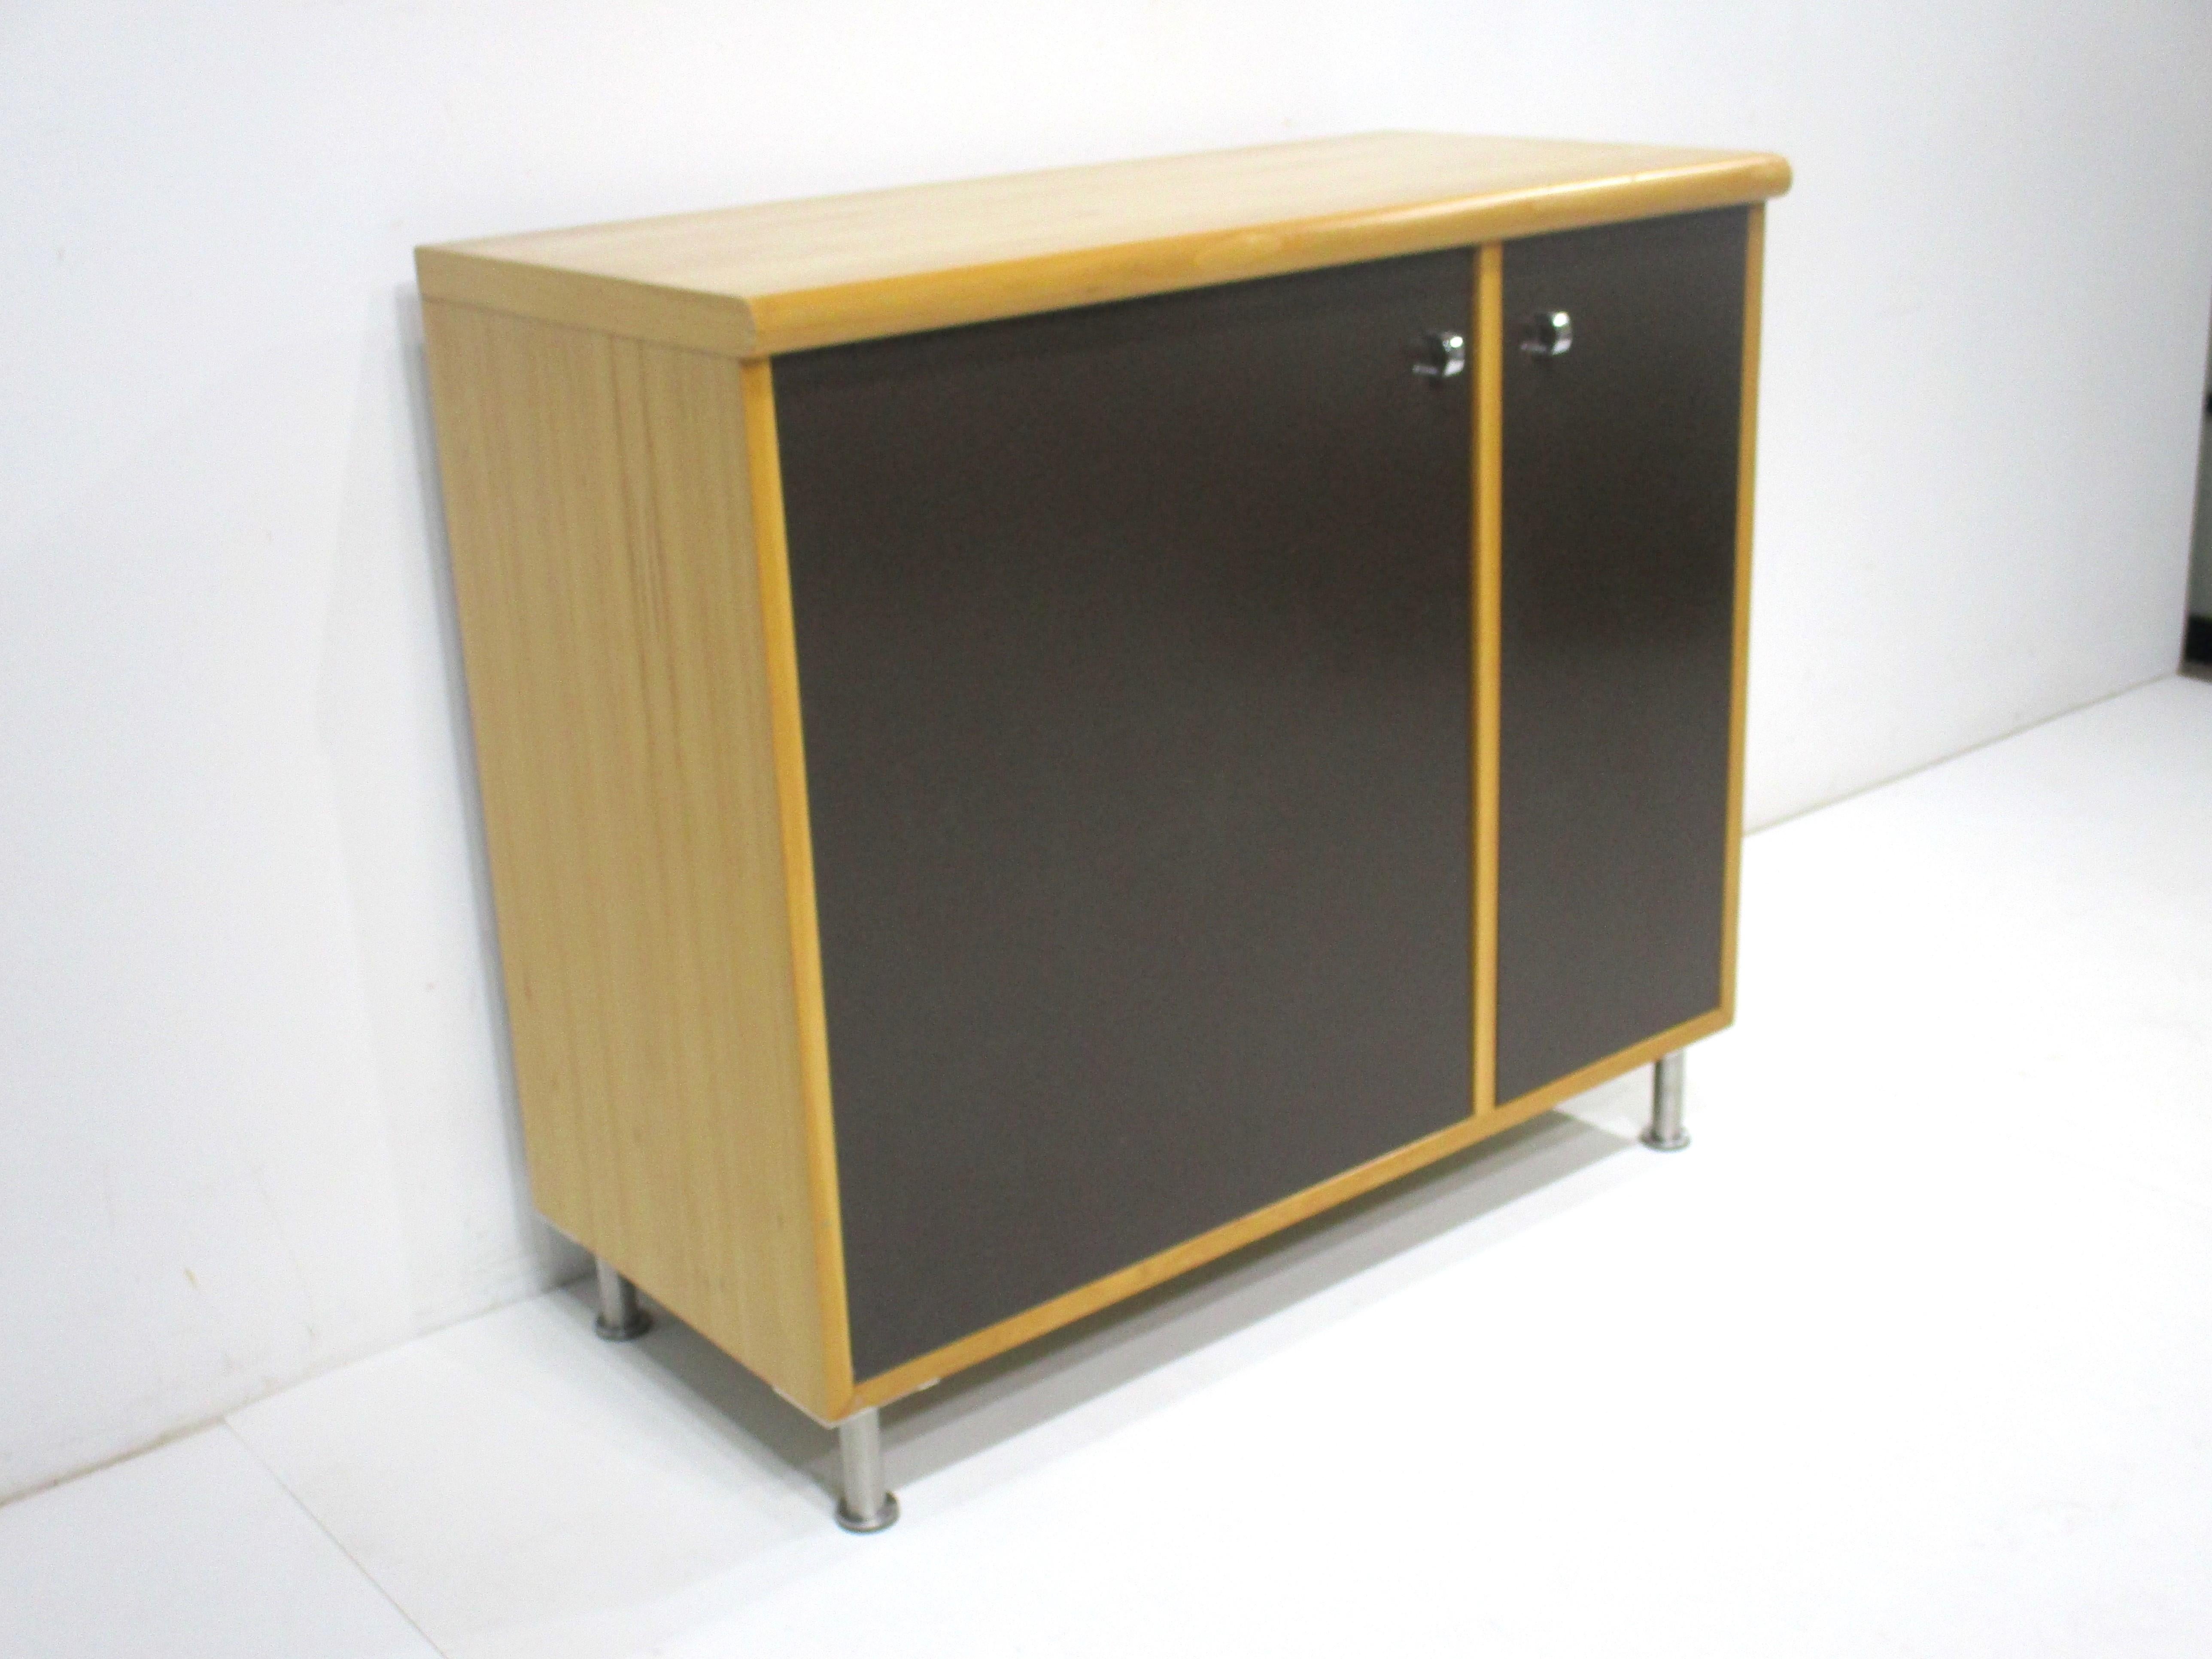 A two door smaller sized cabinet with birch wood case and dark chocolate doors having chromed U shaped finger pulls . Sitting on adjustable brushed stainless steel legs with foot pads to protect your floors . In side are matching birch adjustable